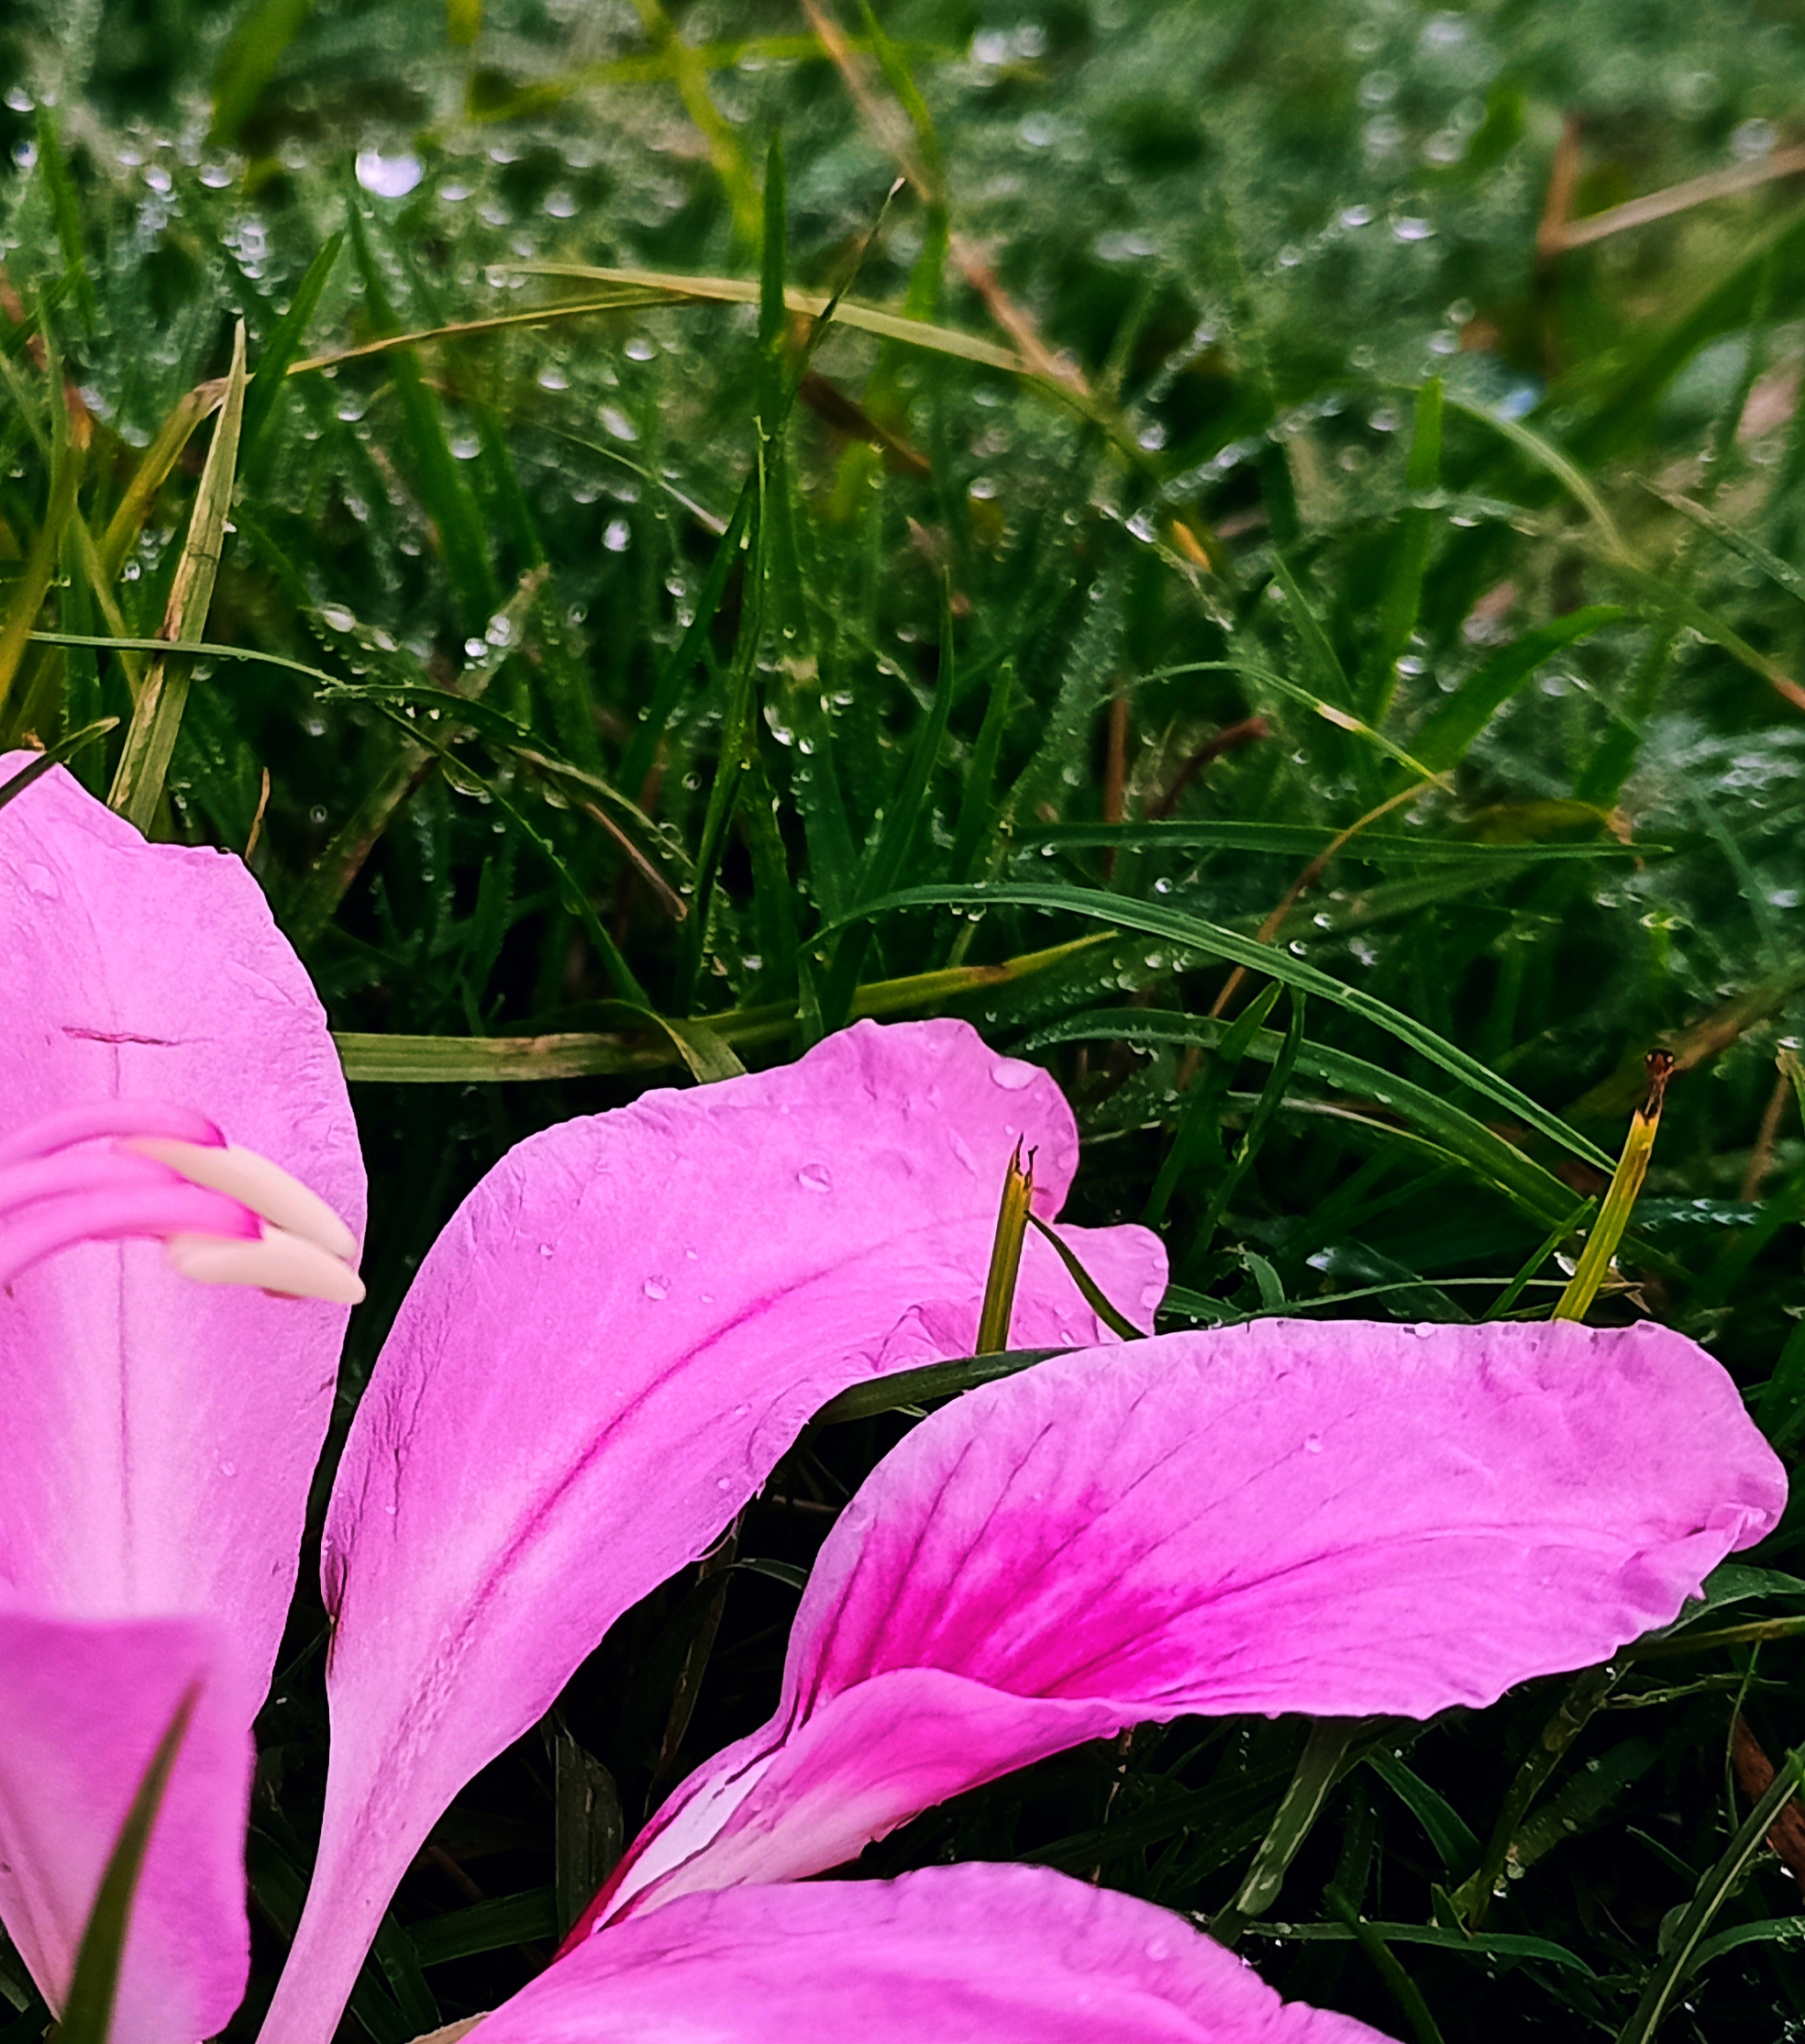 Moisture on flowers and grass